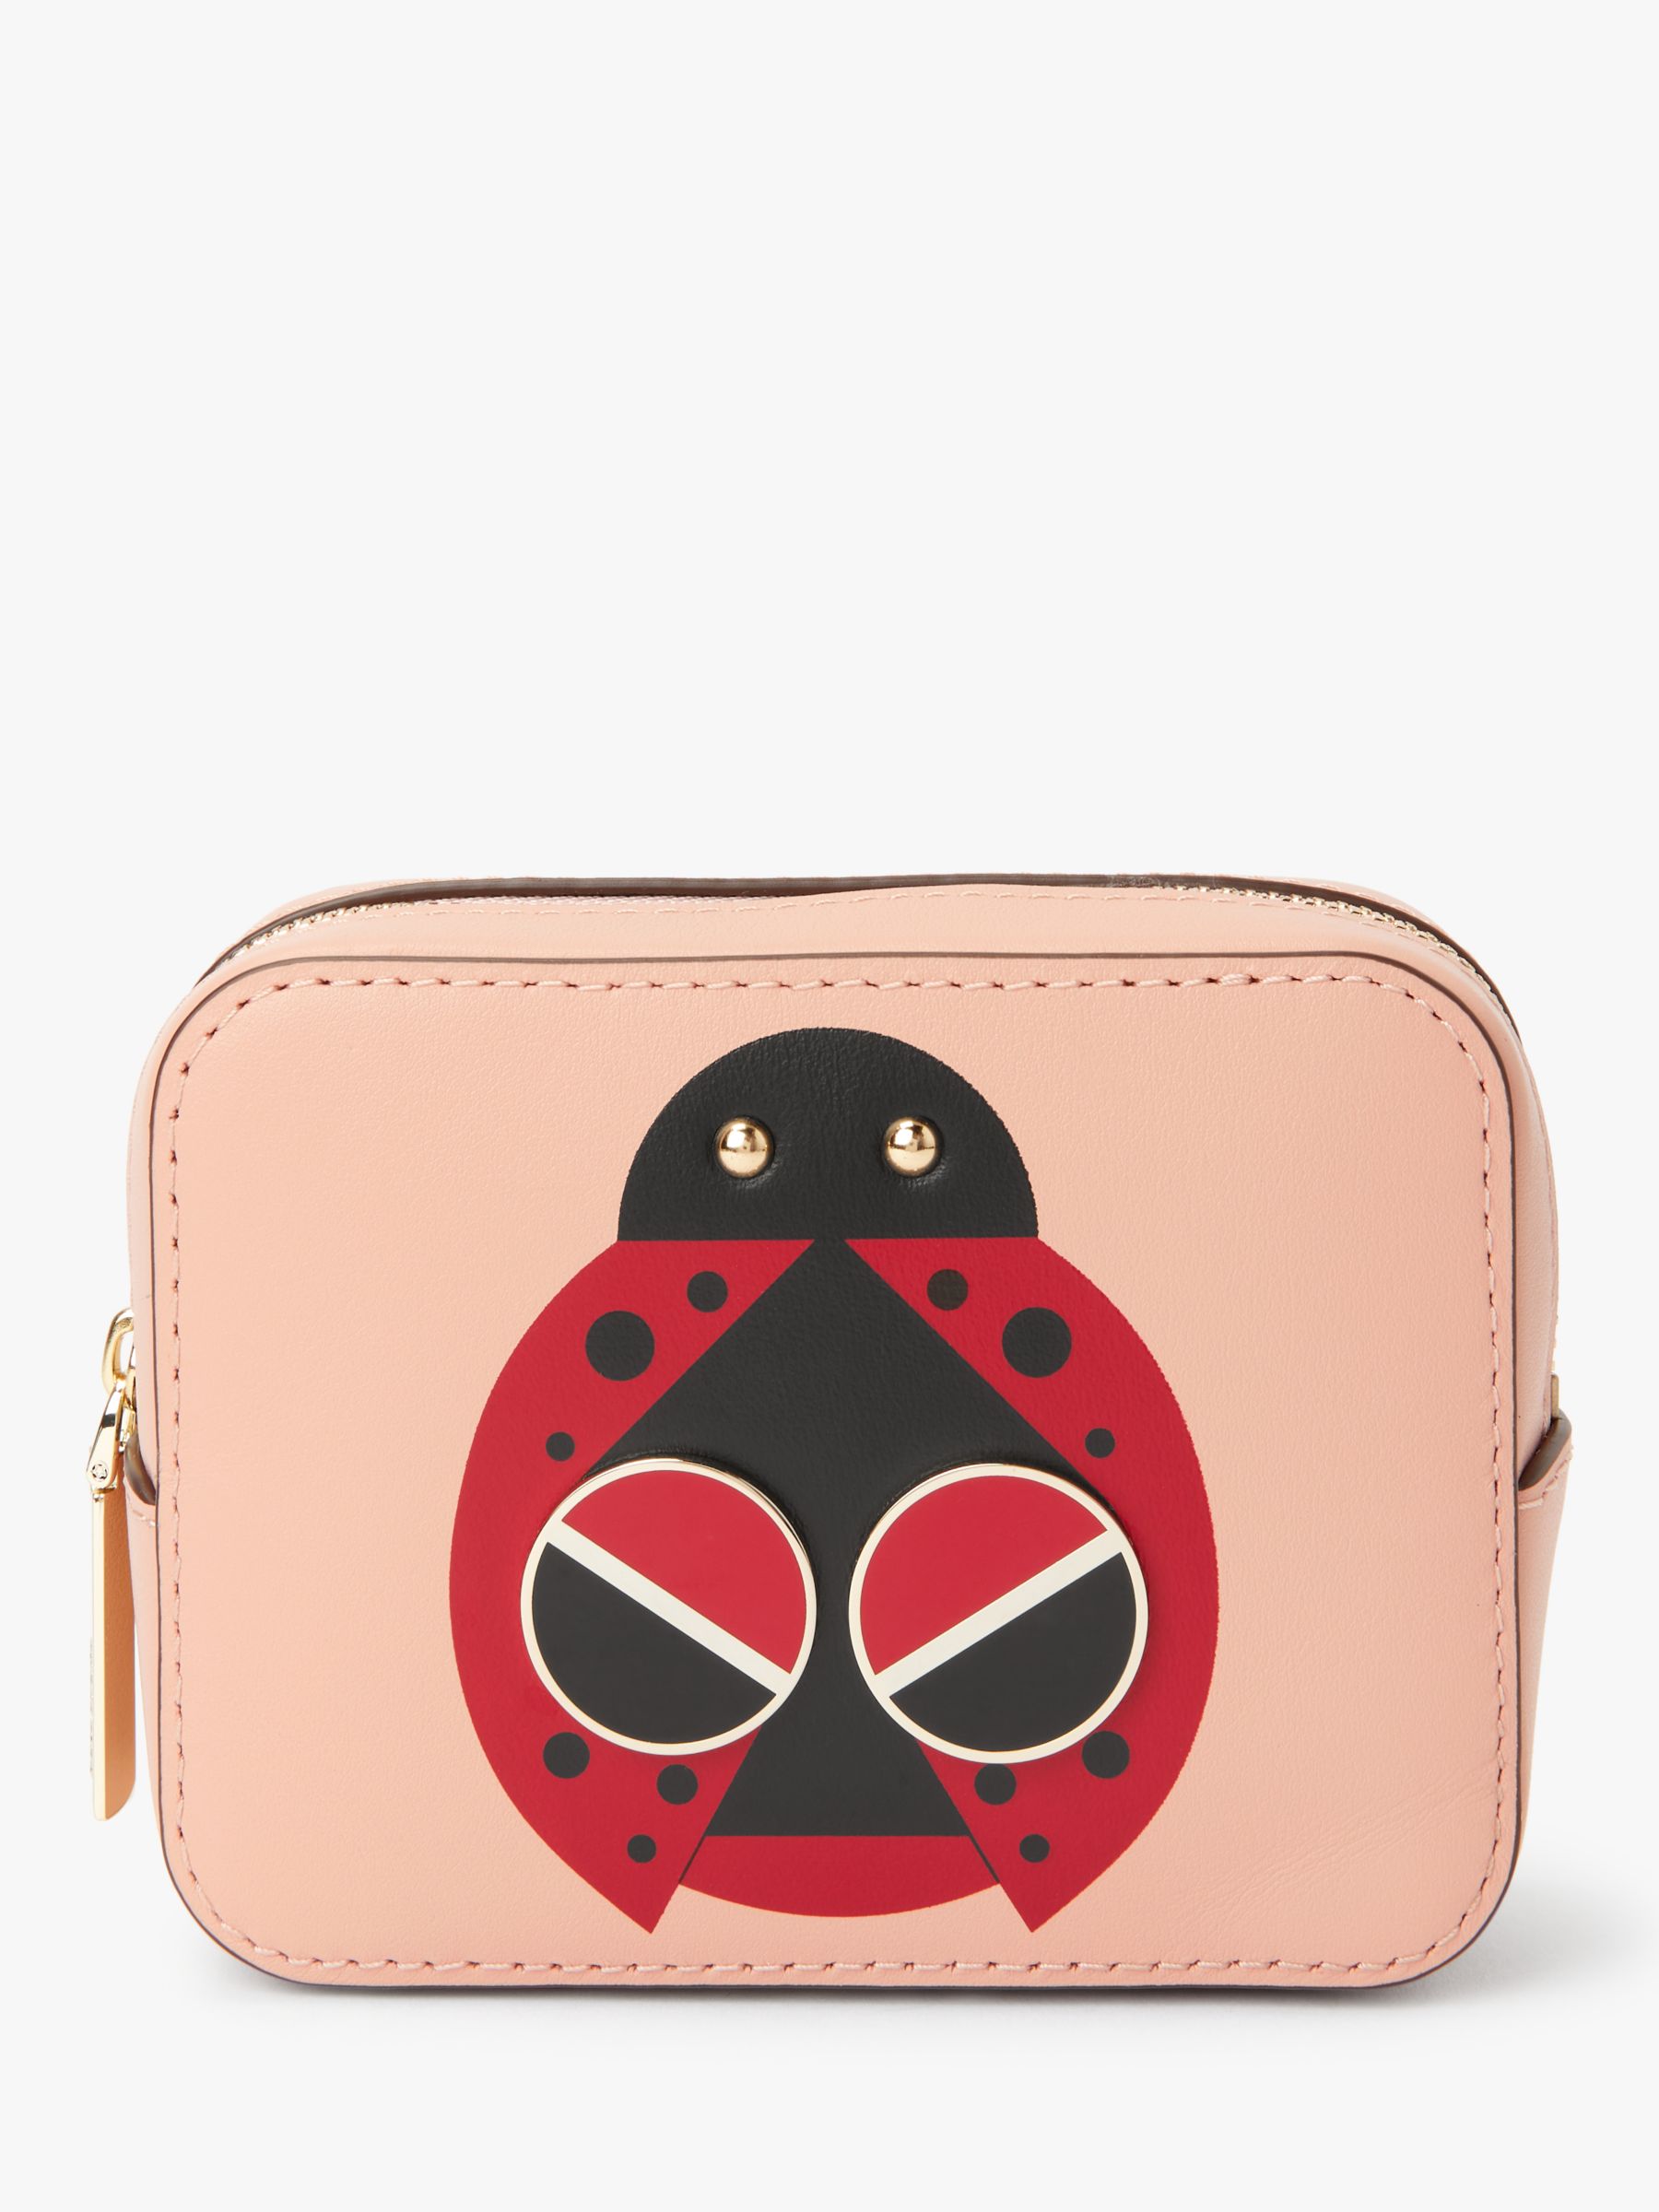 kate spade new york Lady Bug Leather Mini Cosmetic Case, Flapper Pink